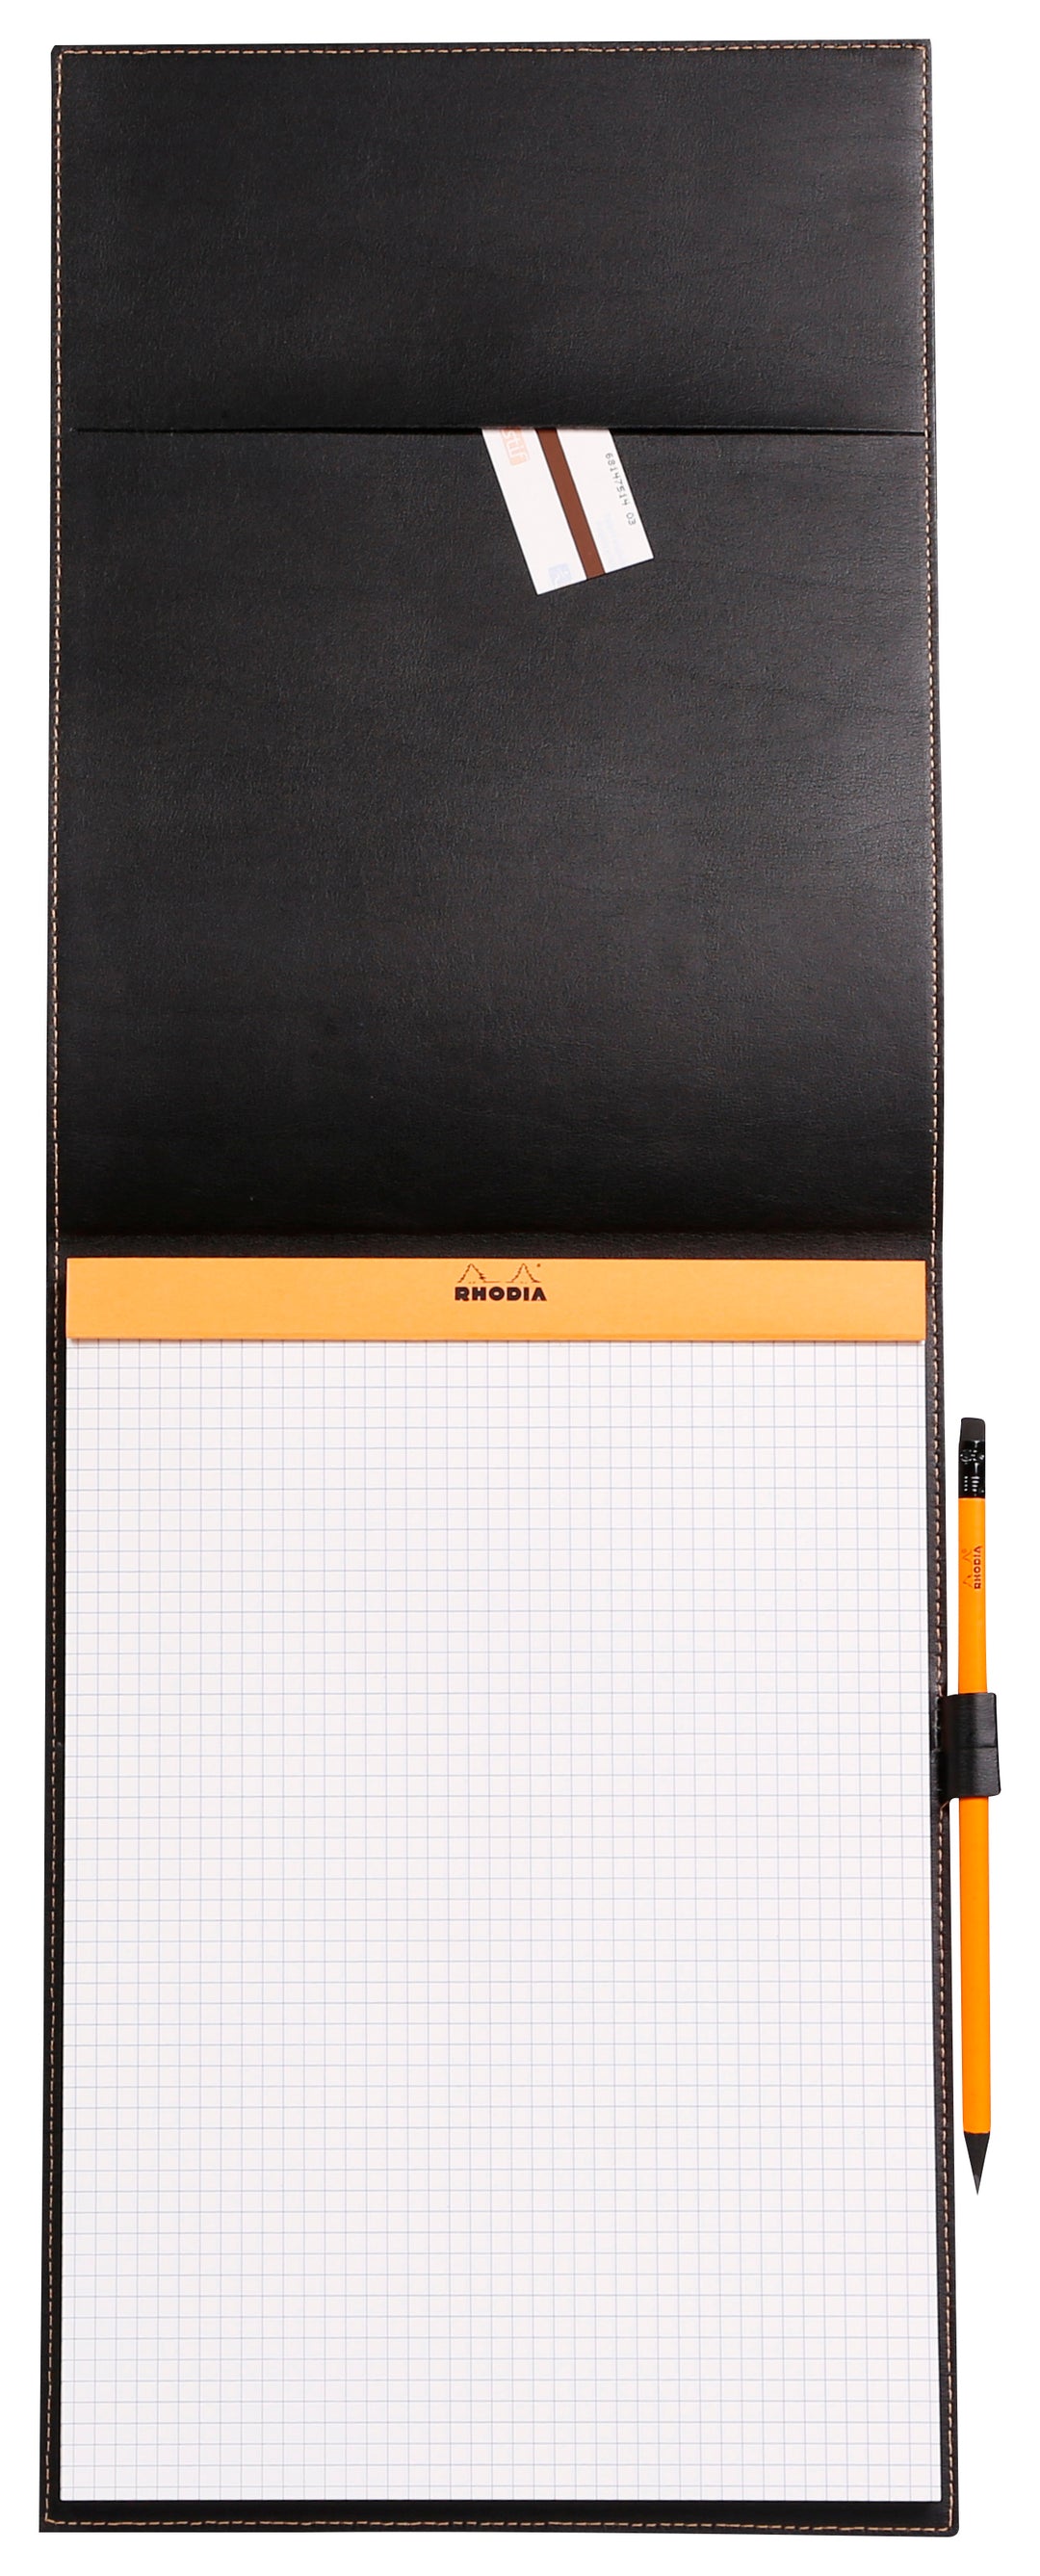 Rhodia Boutique Orange Stapled Square Ruled Notepad with Leatherette Cover - A4